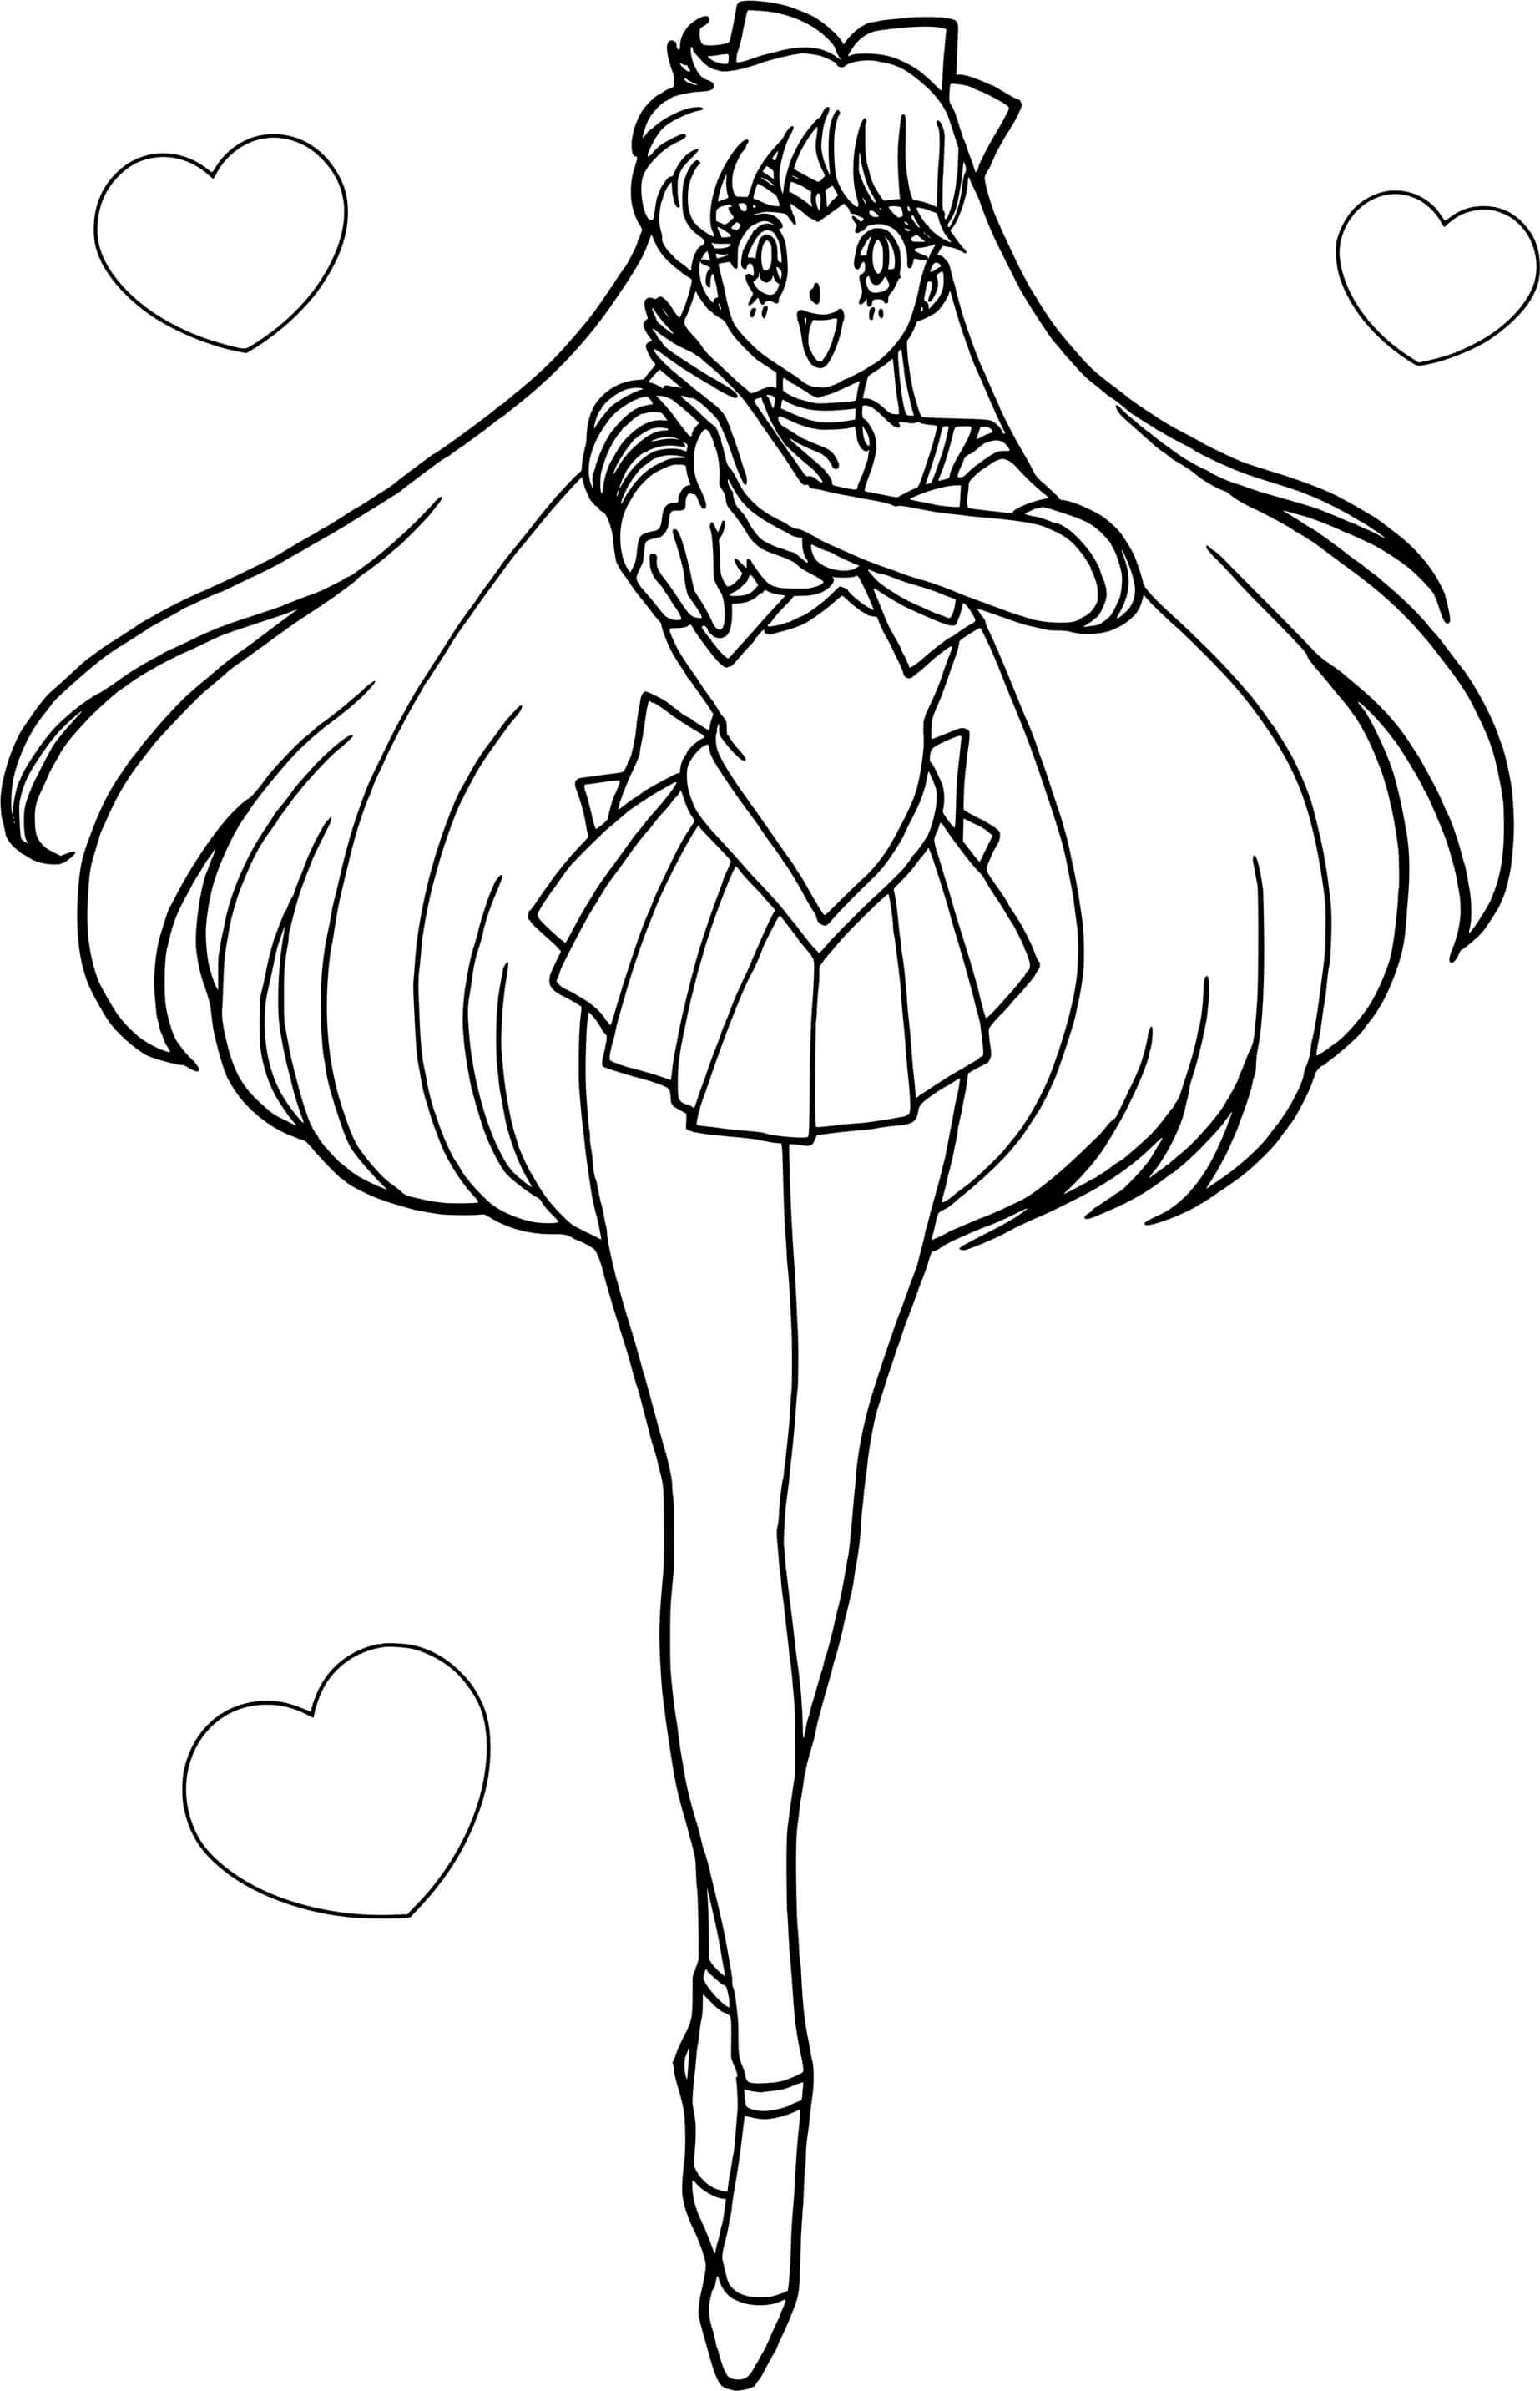 Sailor Moon Love Heart Coloring Page